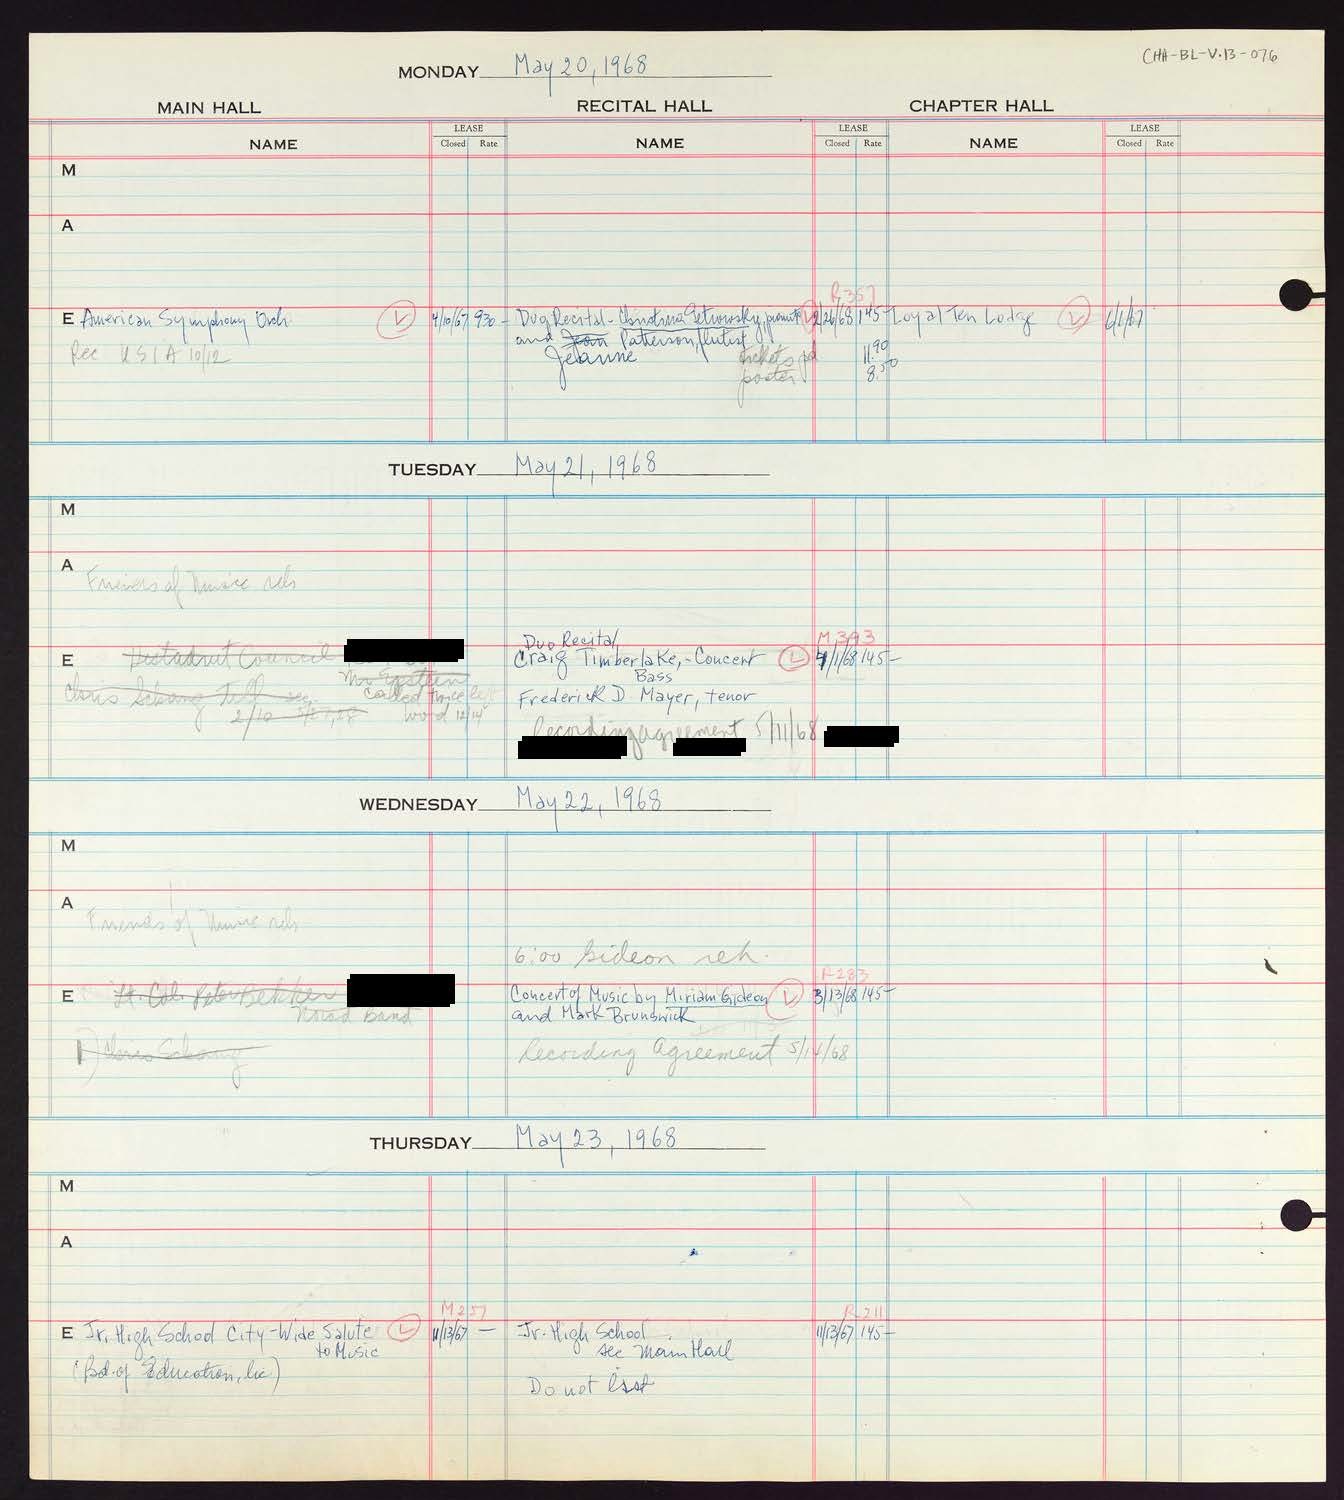 Carnegie Hall Booking Ledger, volume 13, page 76